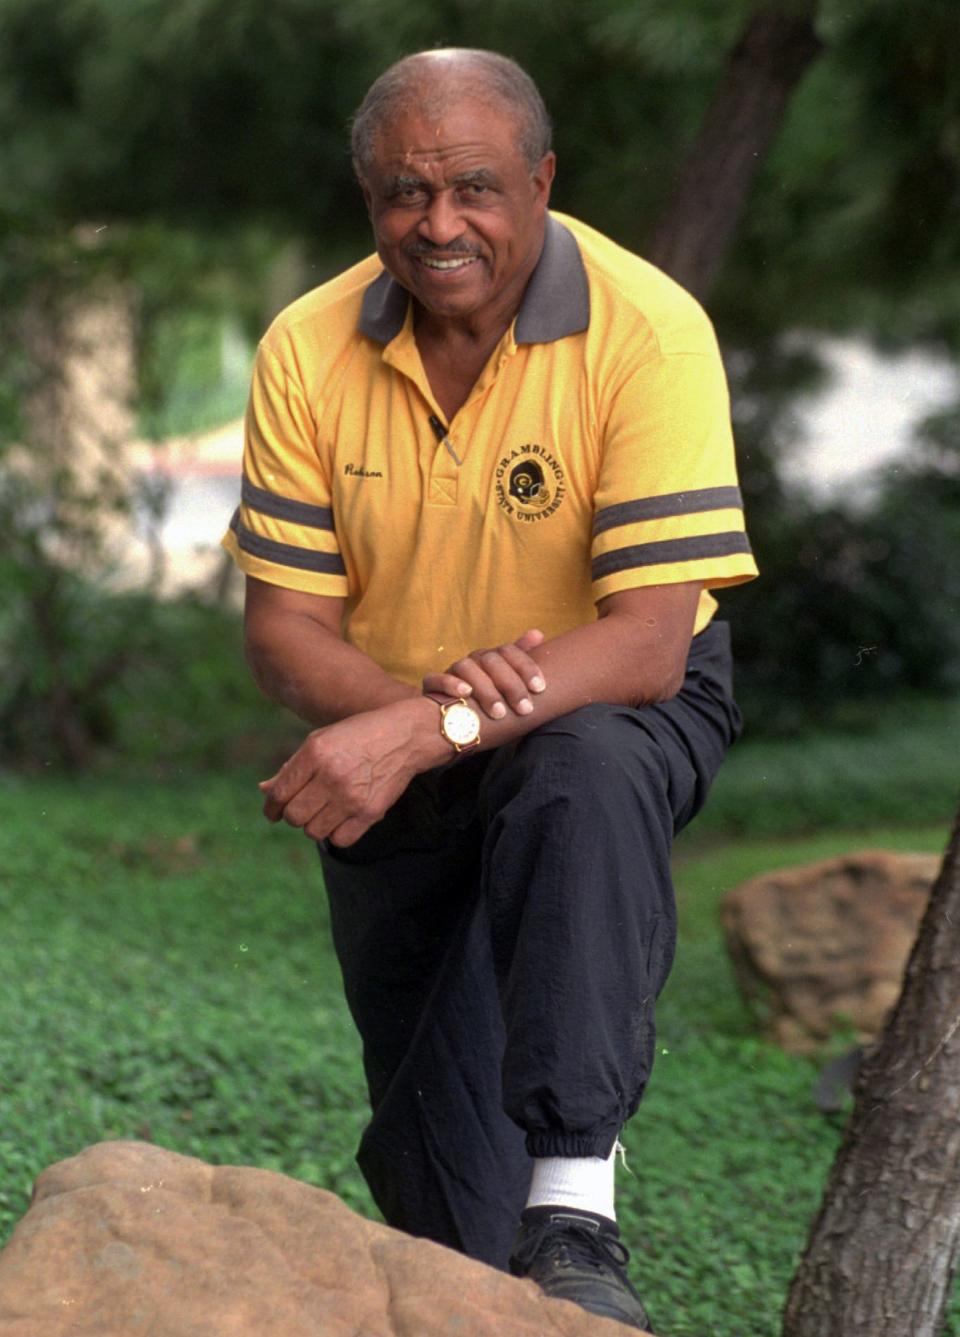 Grambling State coach Eddie Robinson poses in Dallas on Sept. 30, 1994. Grambling built a powerhouse program under longtime coach Robinson, sending countless players to the NFL after they were denied the opportunity to attend white-only universities..